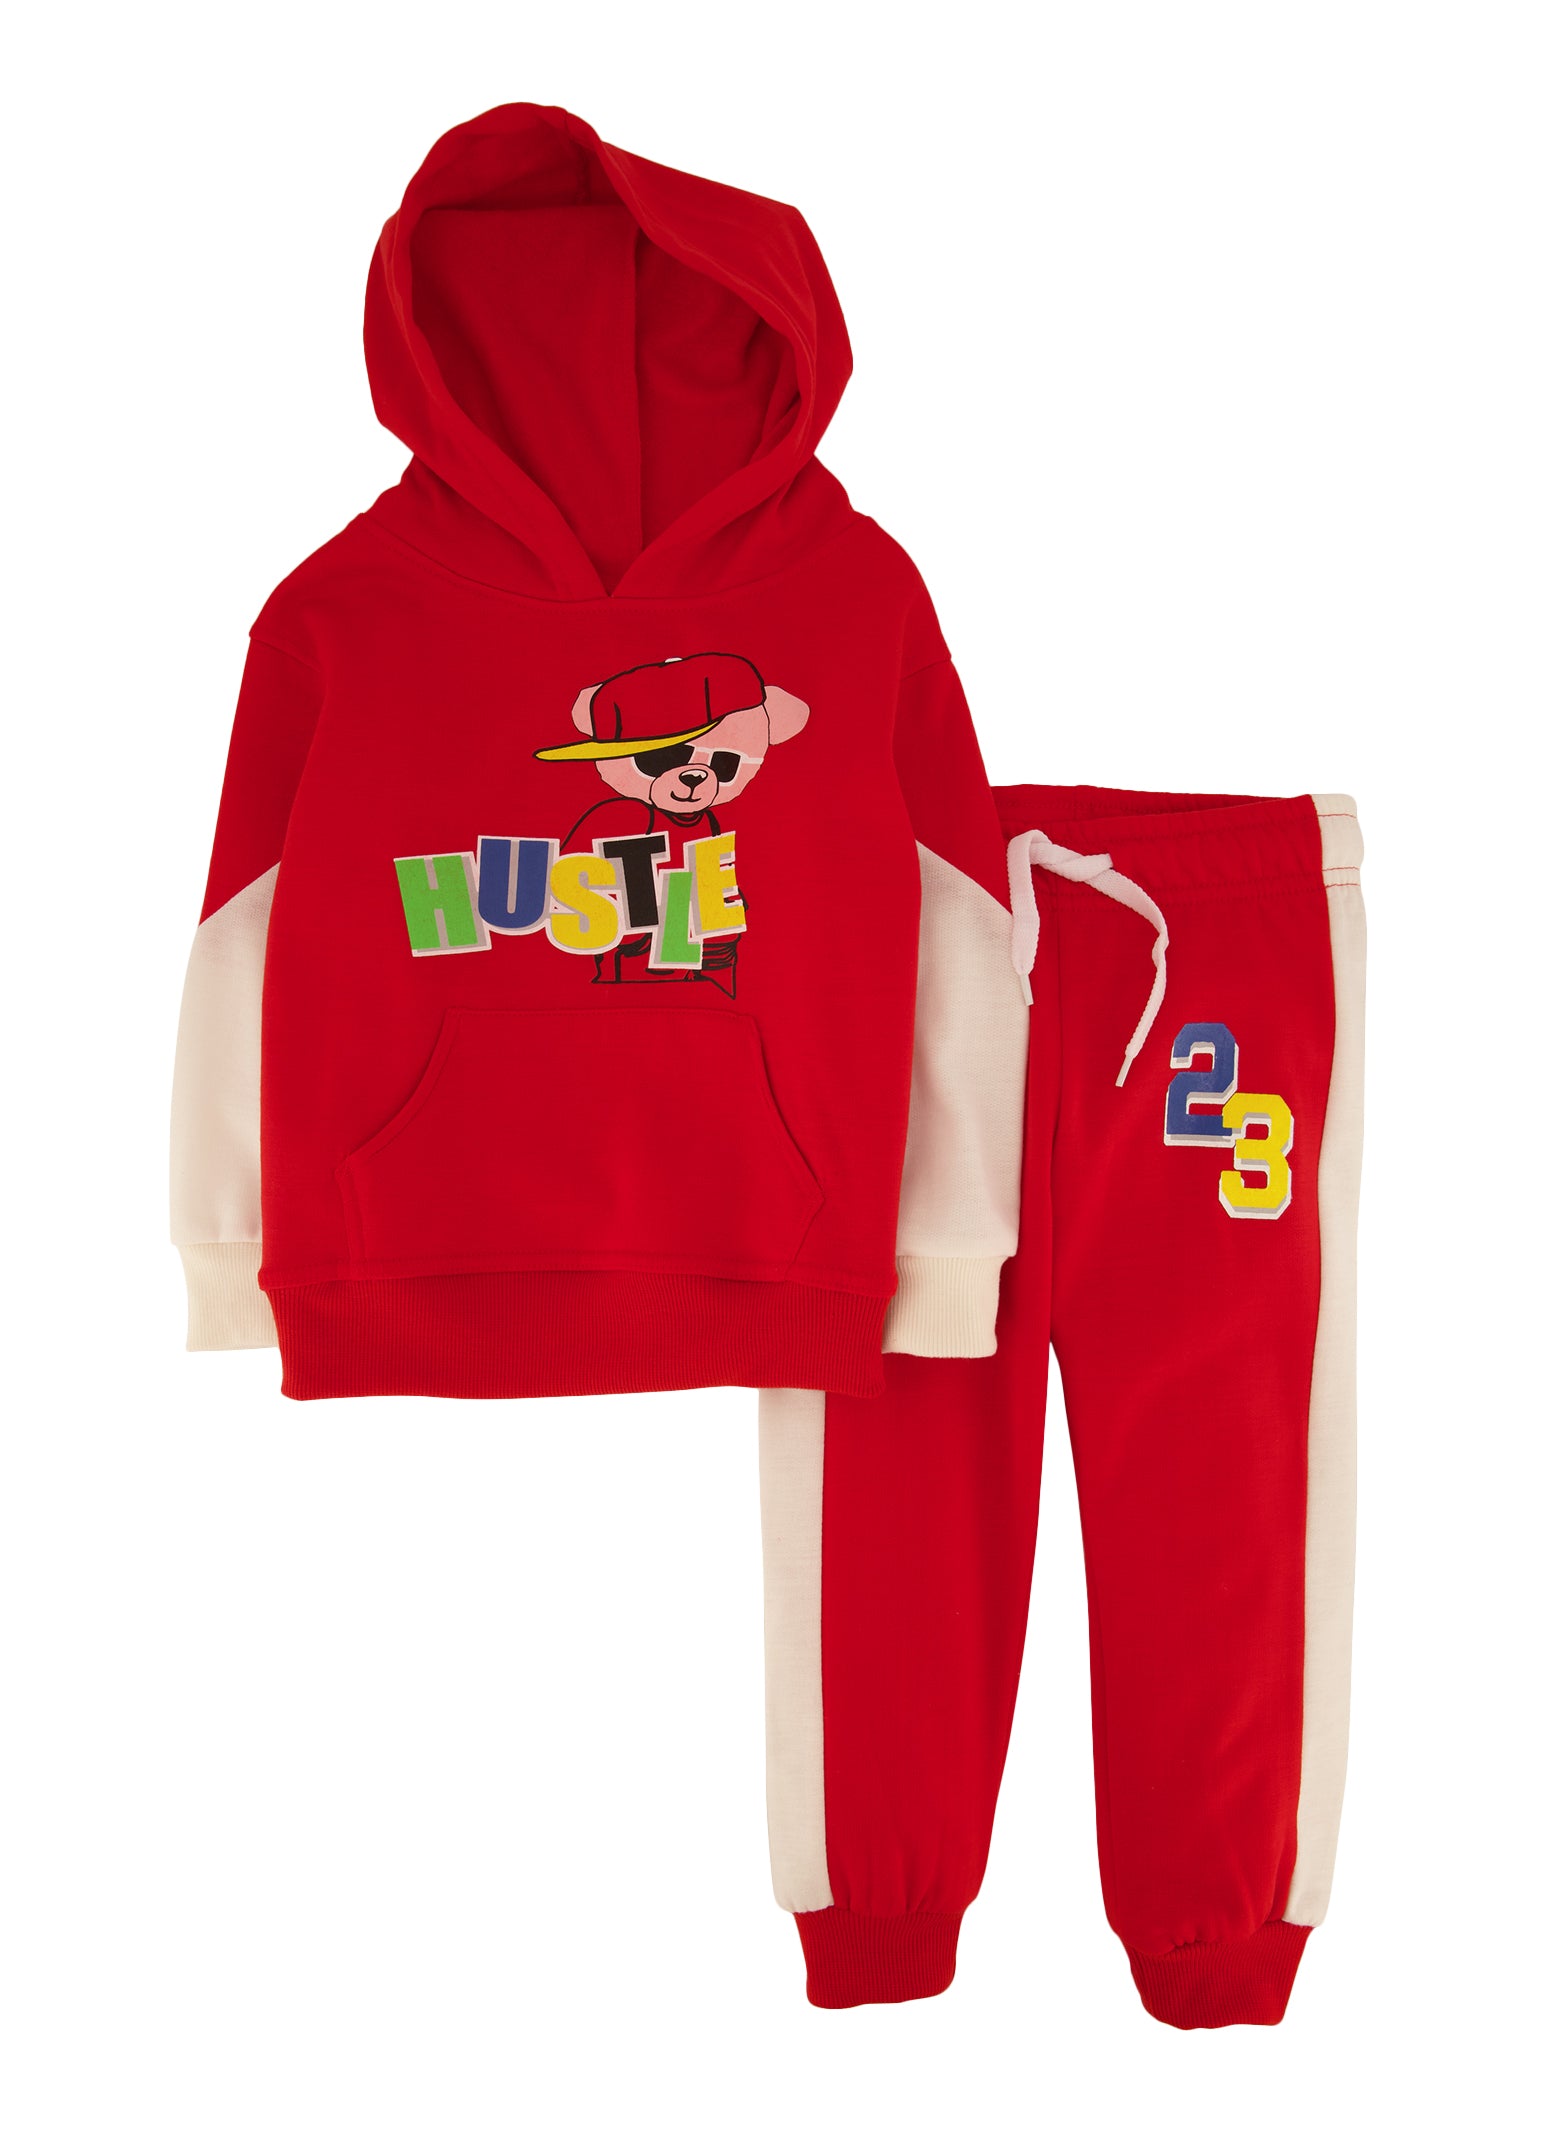 Toddler Boys Hustle Bear Graphic Hoodie and Joggers, Red, Size 3T